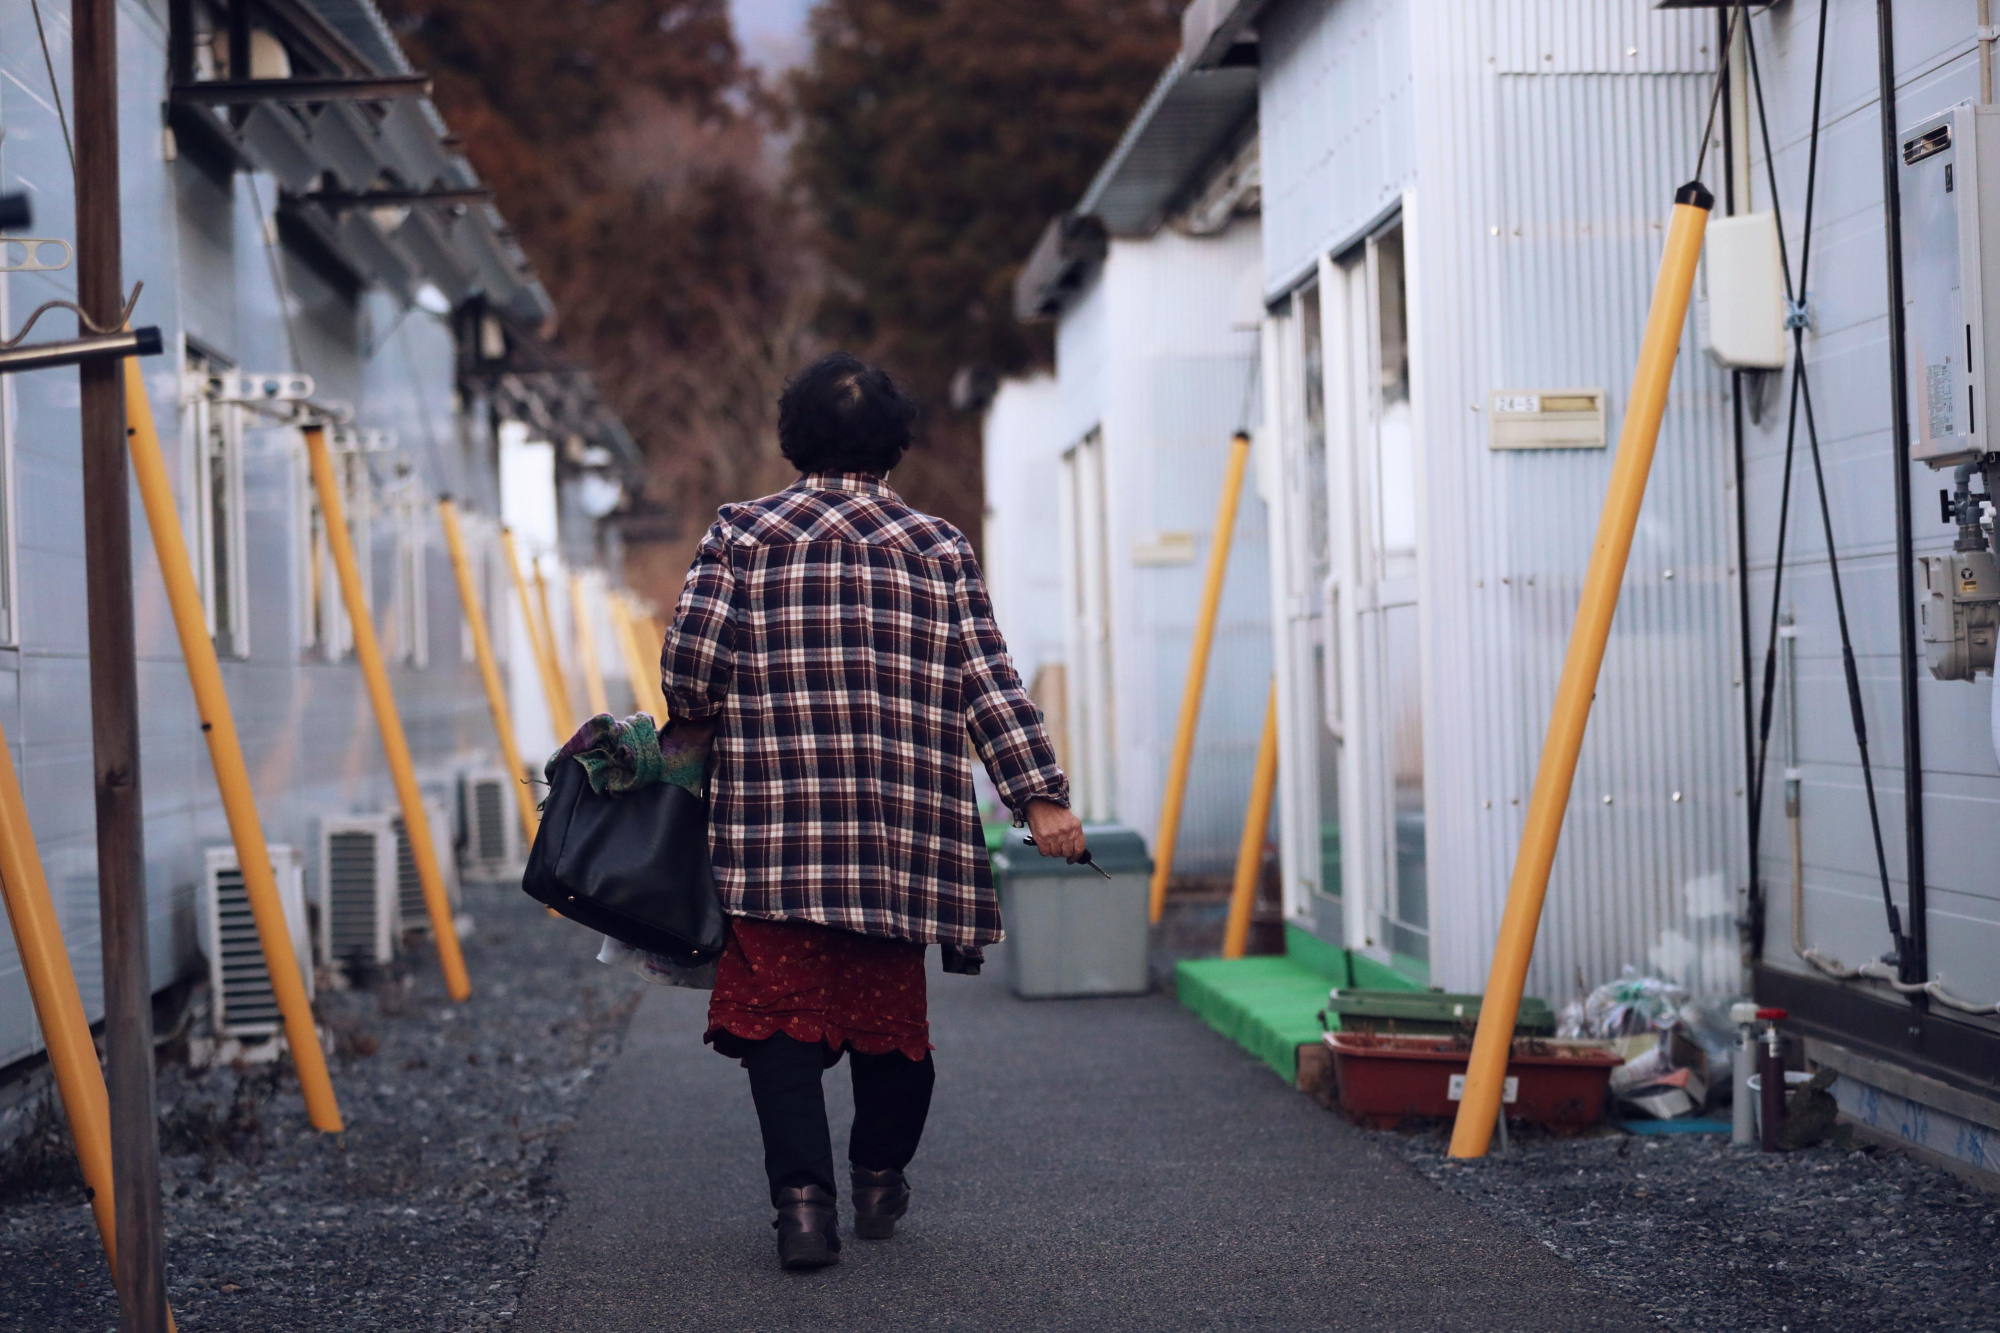 The long stopgap: A woman visits her son, who is still living in temporary housing in Ofunato, Iwate Prefecture. | KYODO